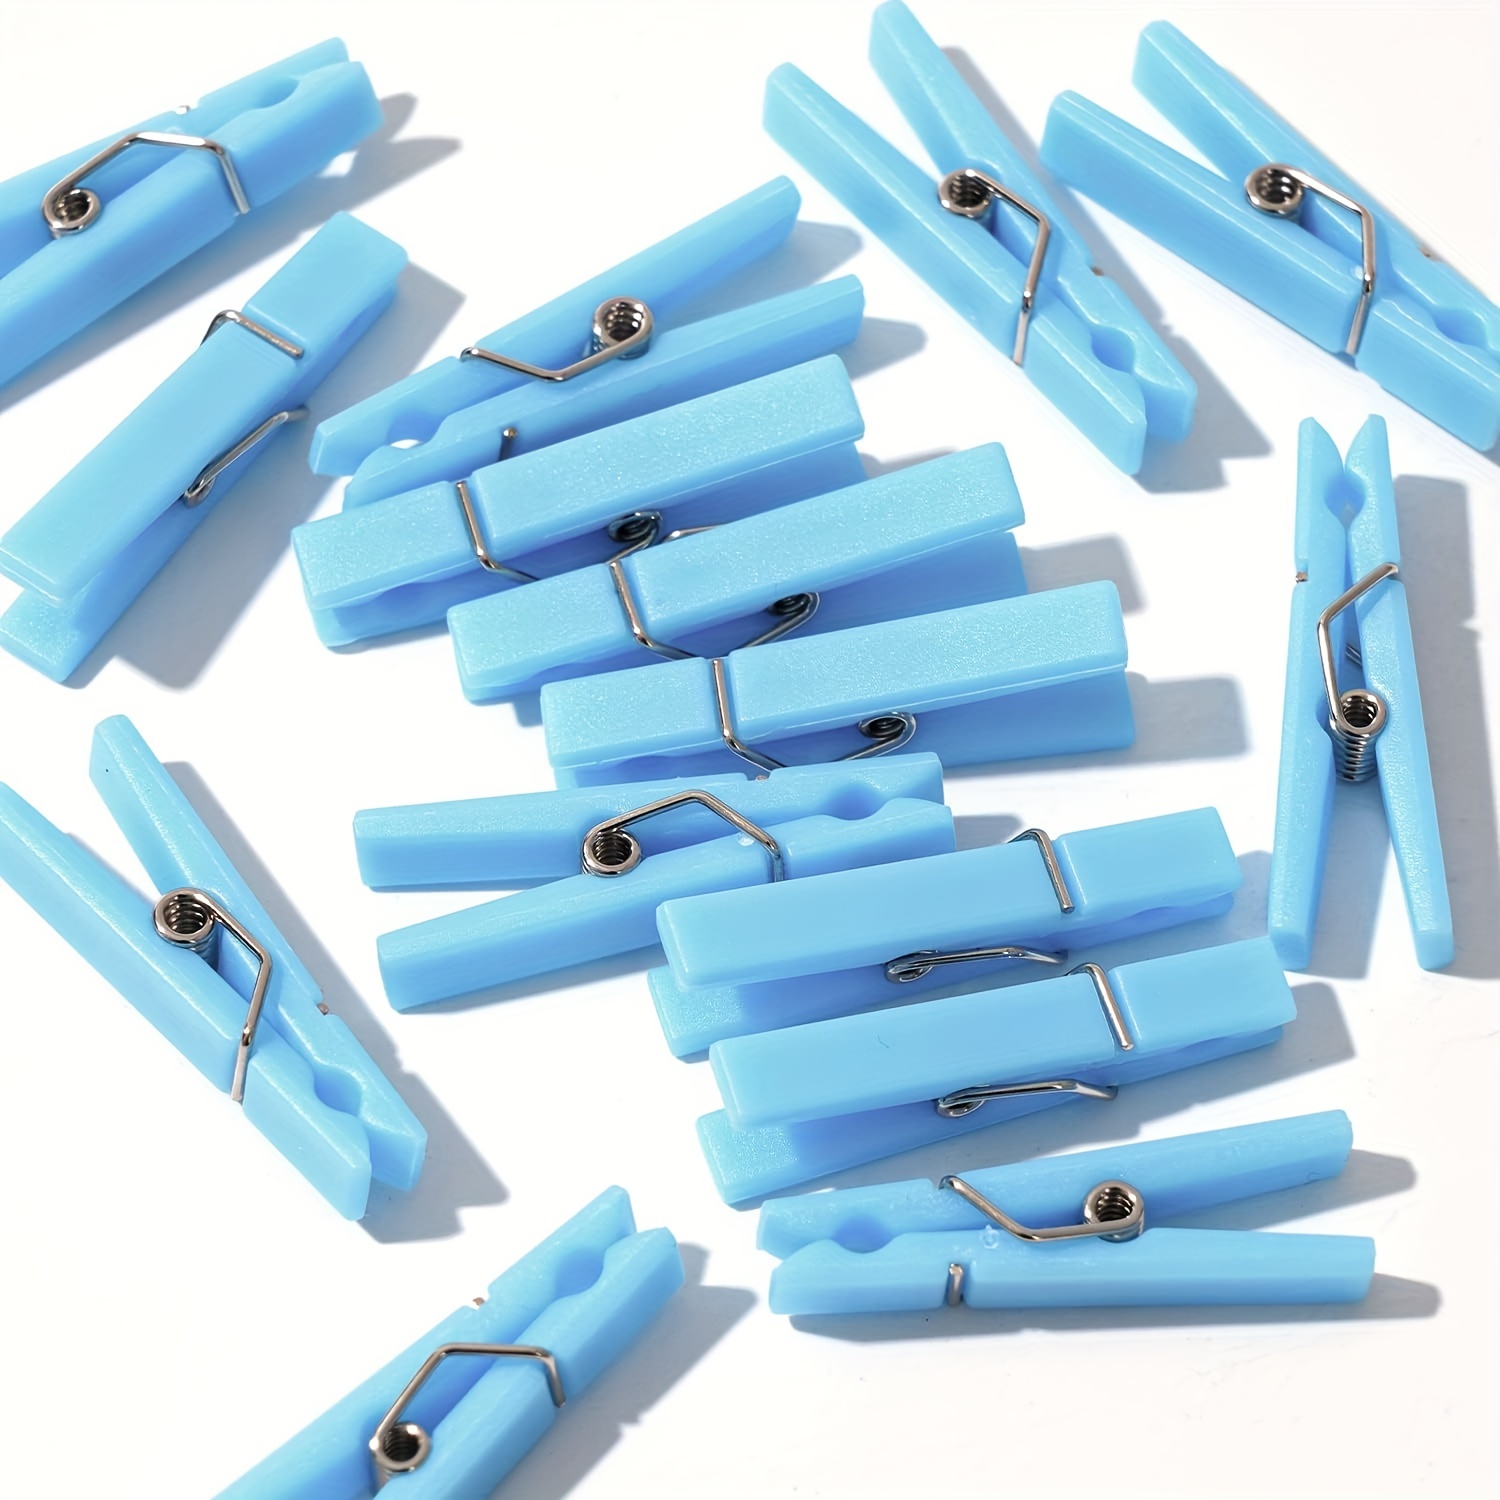 PARTYGOGO 48pcs Small Clothes Pins Baby Shower Clothespin Favors - Clothespins for Crafts Photos Wooden Paper Picture Clips Little Clothes Pins for Hanging